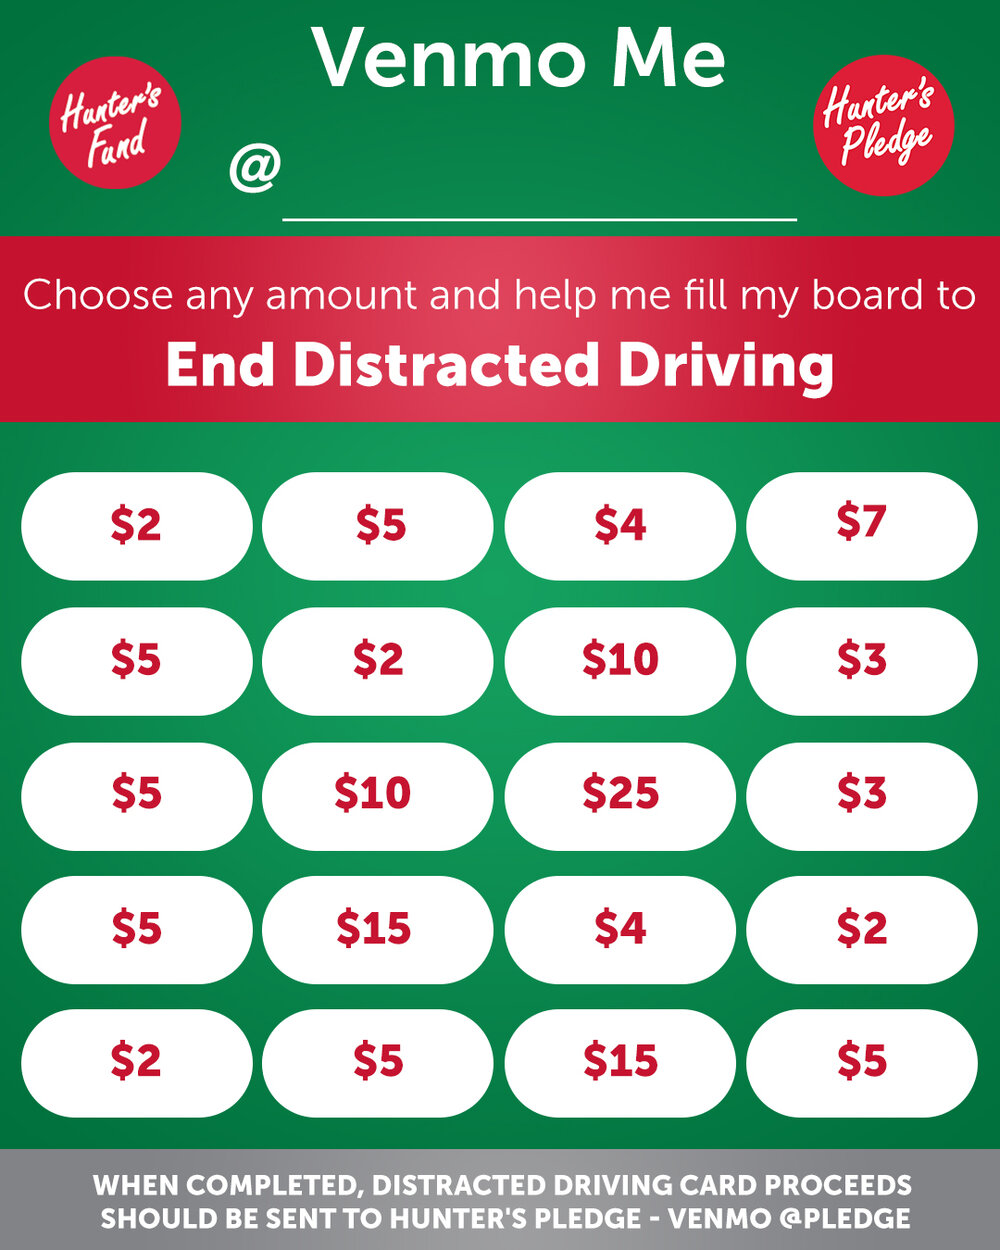 An example of a bingo-style graphic for social media. "Venmo Me. Choose any amount and help me fill my board to End Distracted Driving" Many bubbles contain dollar amounts from $2 to $25.